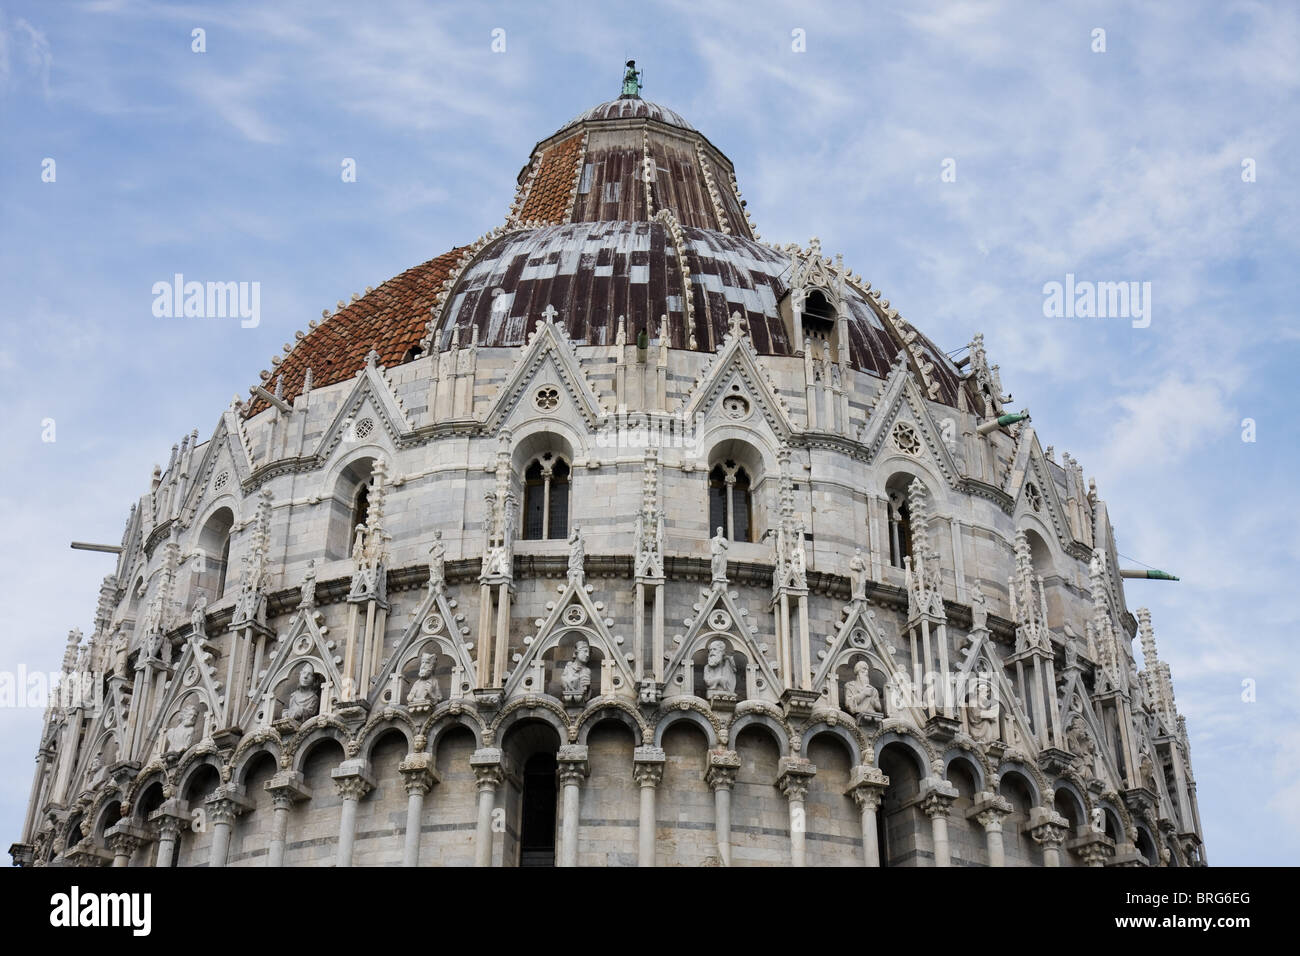 The dome of the Baptistry in Pisa Stock Photo